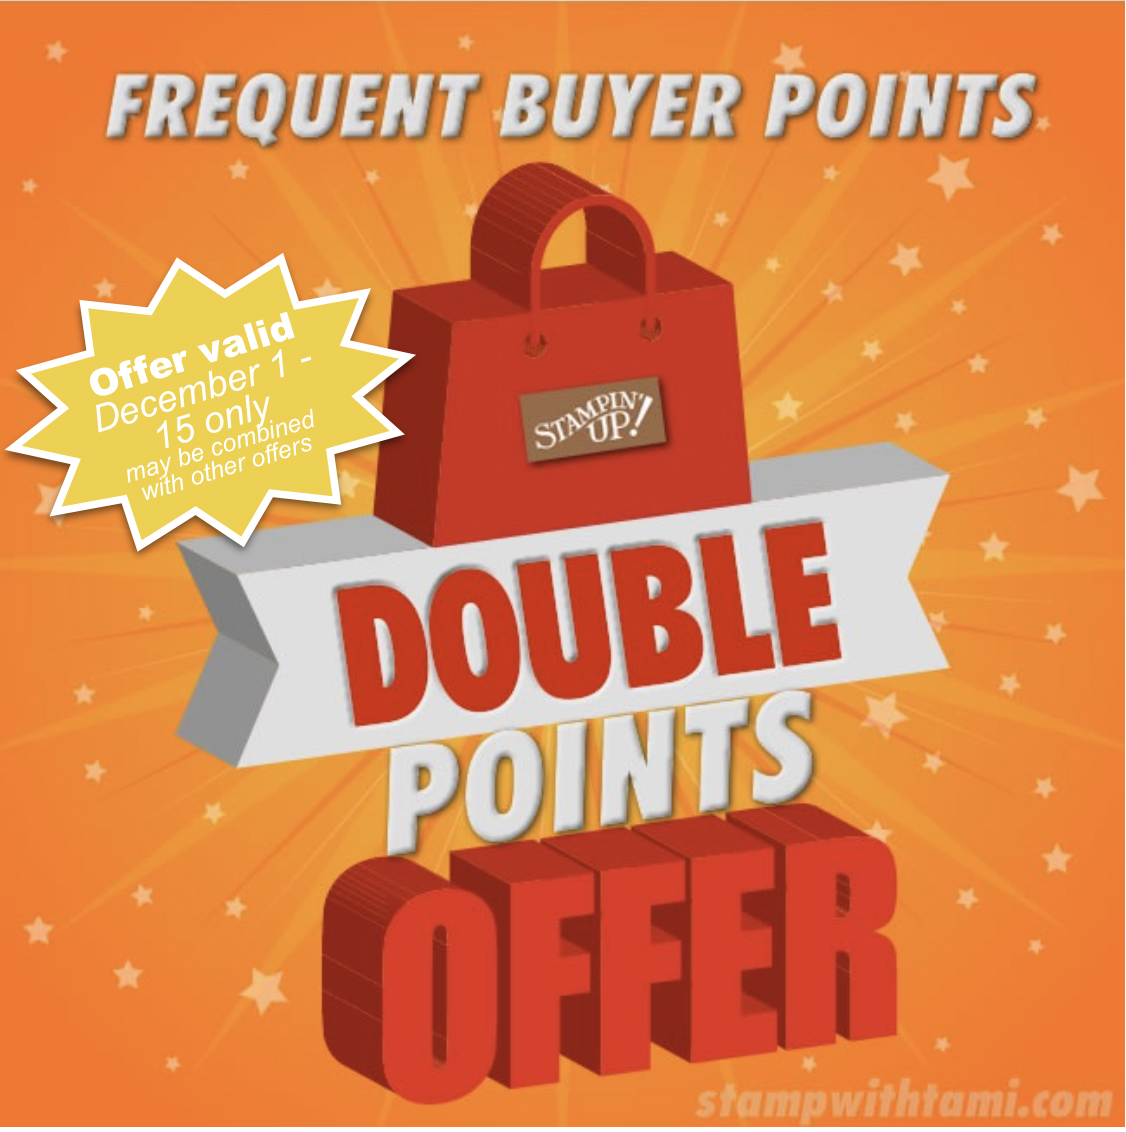 double-frequent-buyer-point-special